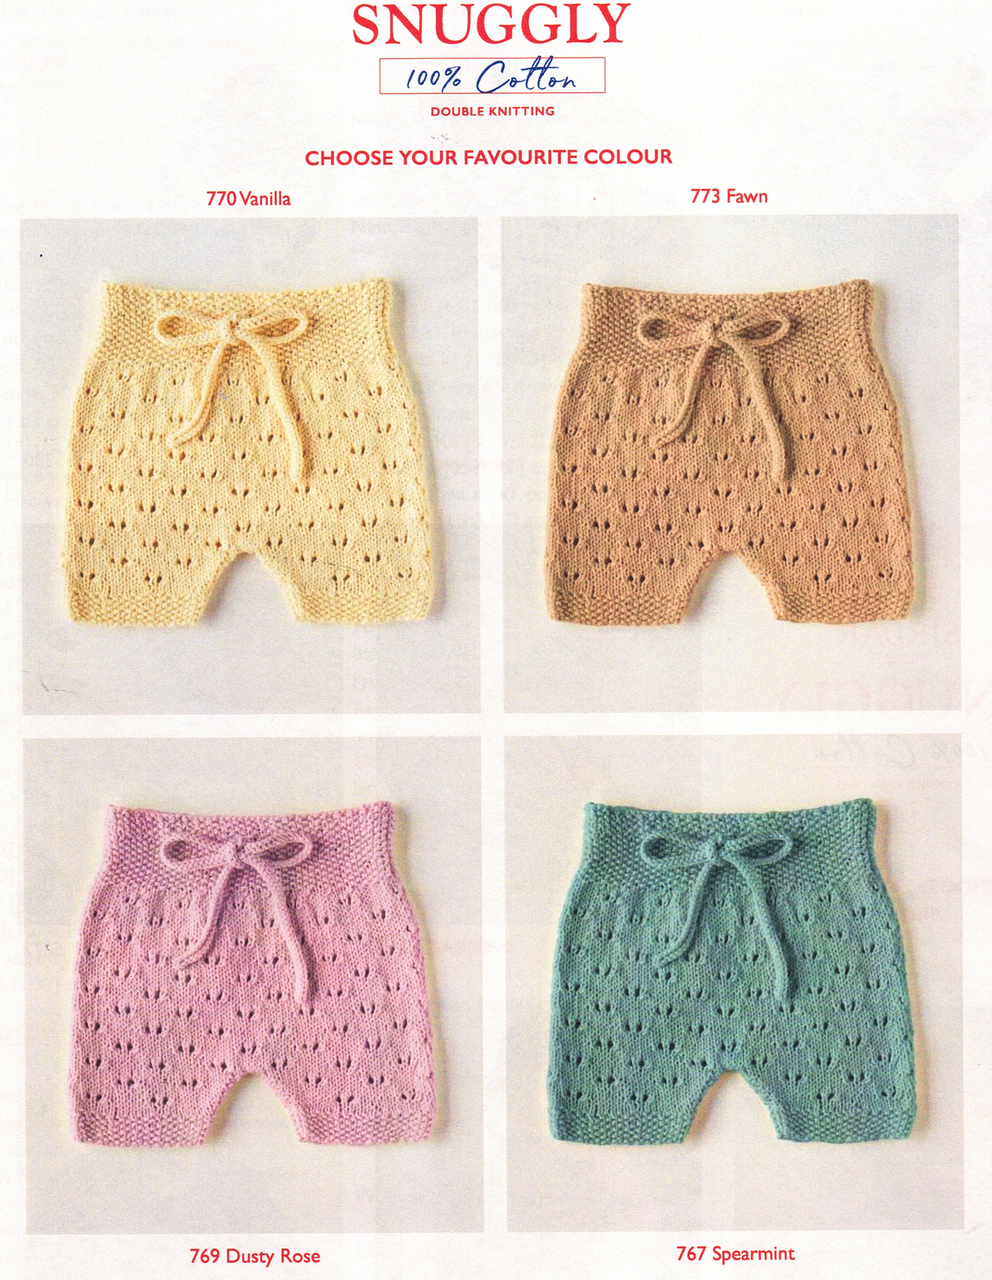 5377 Sirdar/DMC Shorts & Leggings in Baby Cotton 8ply - 0 to 2 years